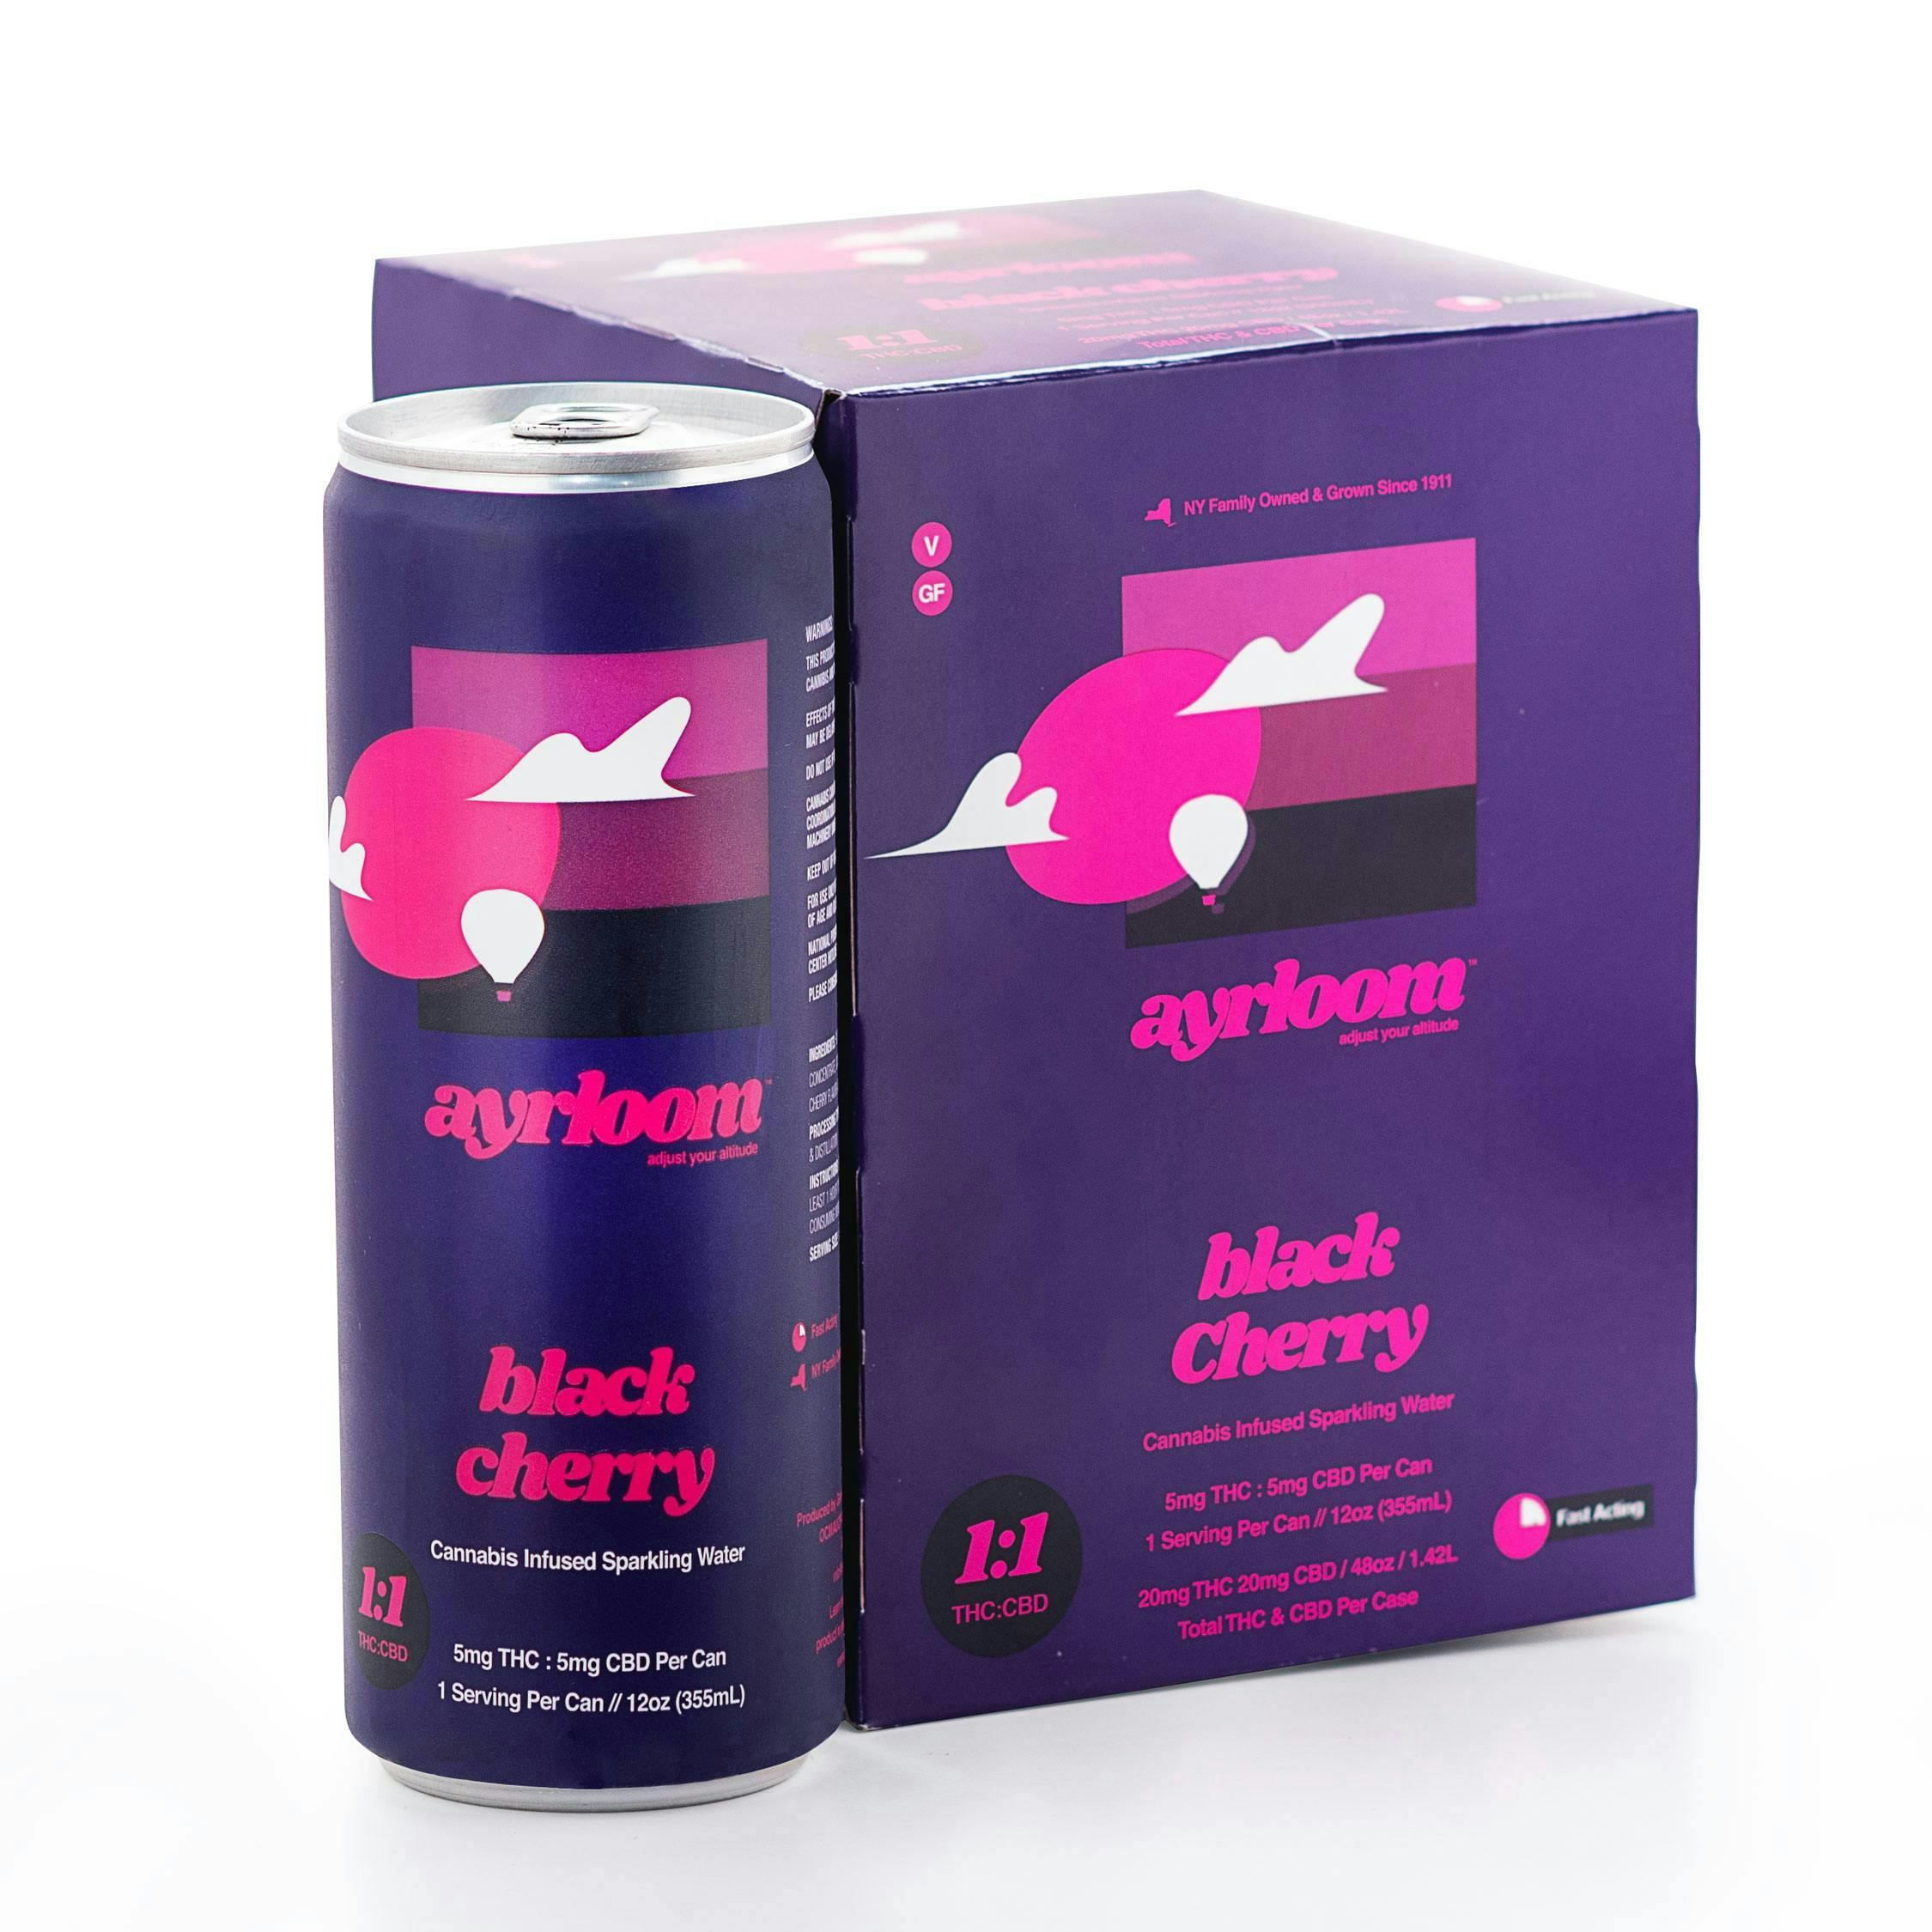 Black Cherry 1:1 Infused Sparkling Water • 4 Pack - ayrloom | Treehouse Cannabis - Weed delivery for New York